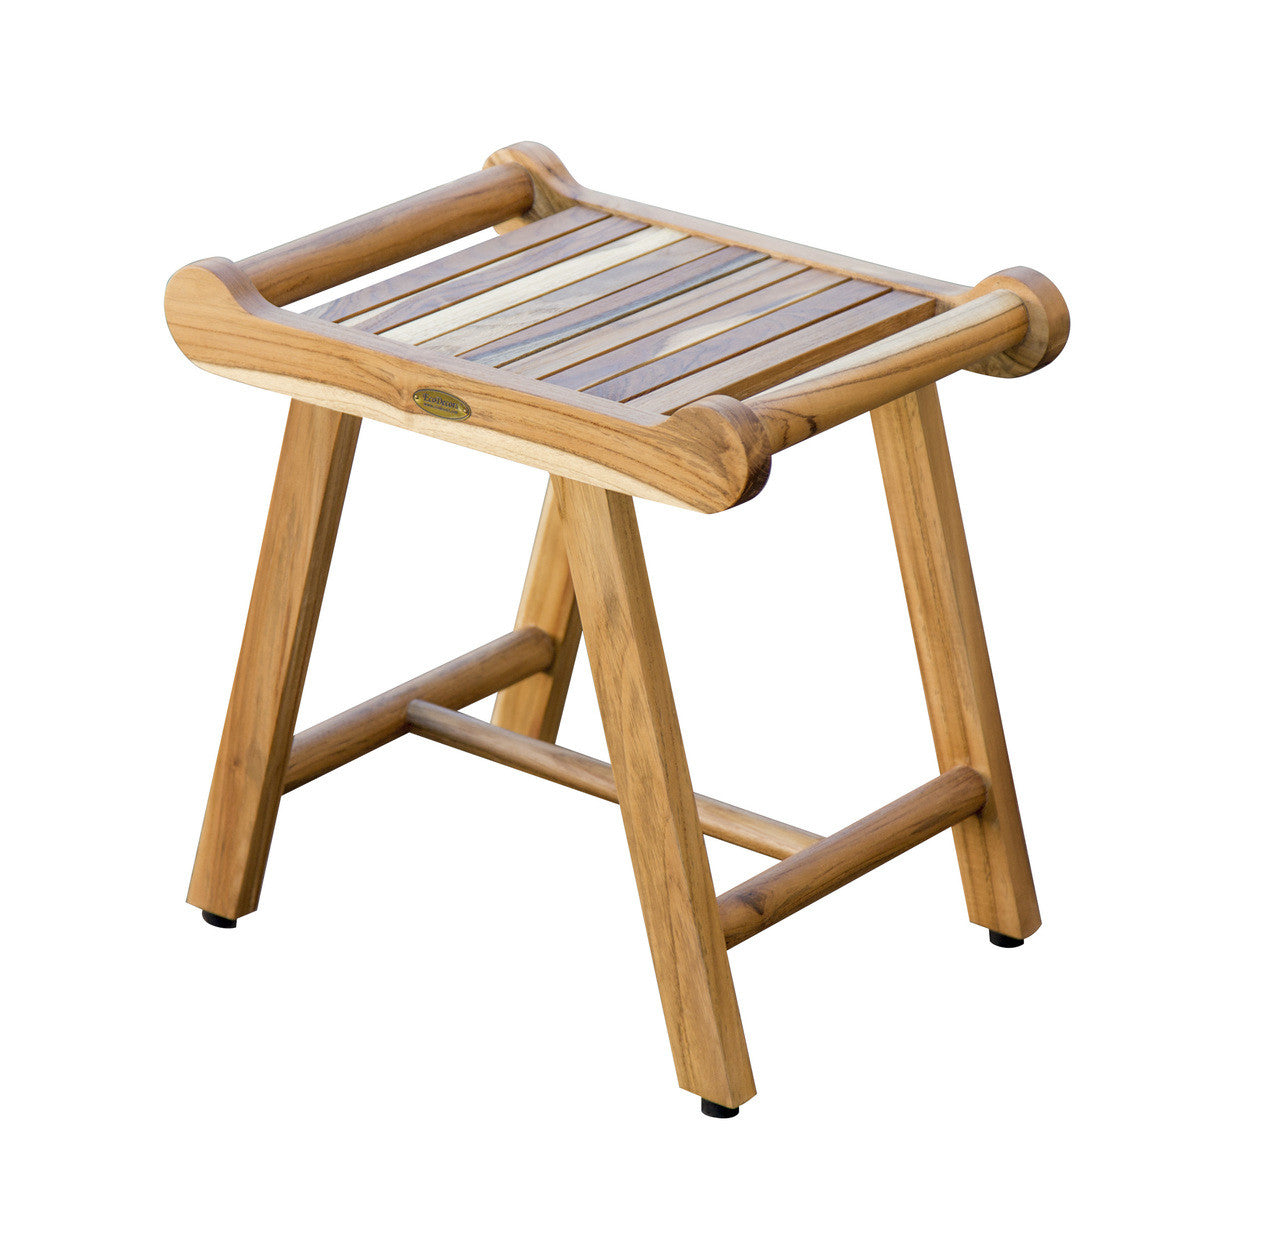 EcoDecors® Harmony® 20" Teak Wood Shower Bench with LiftAide® Arms in EarthyTeak Finish